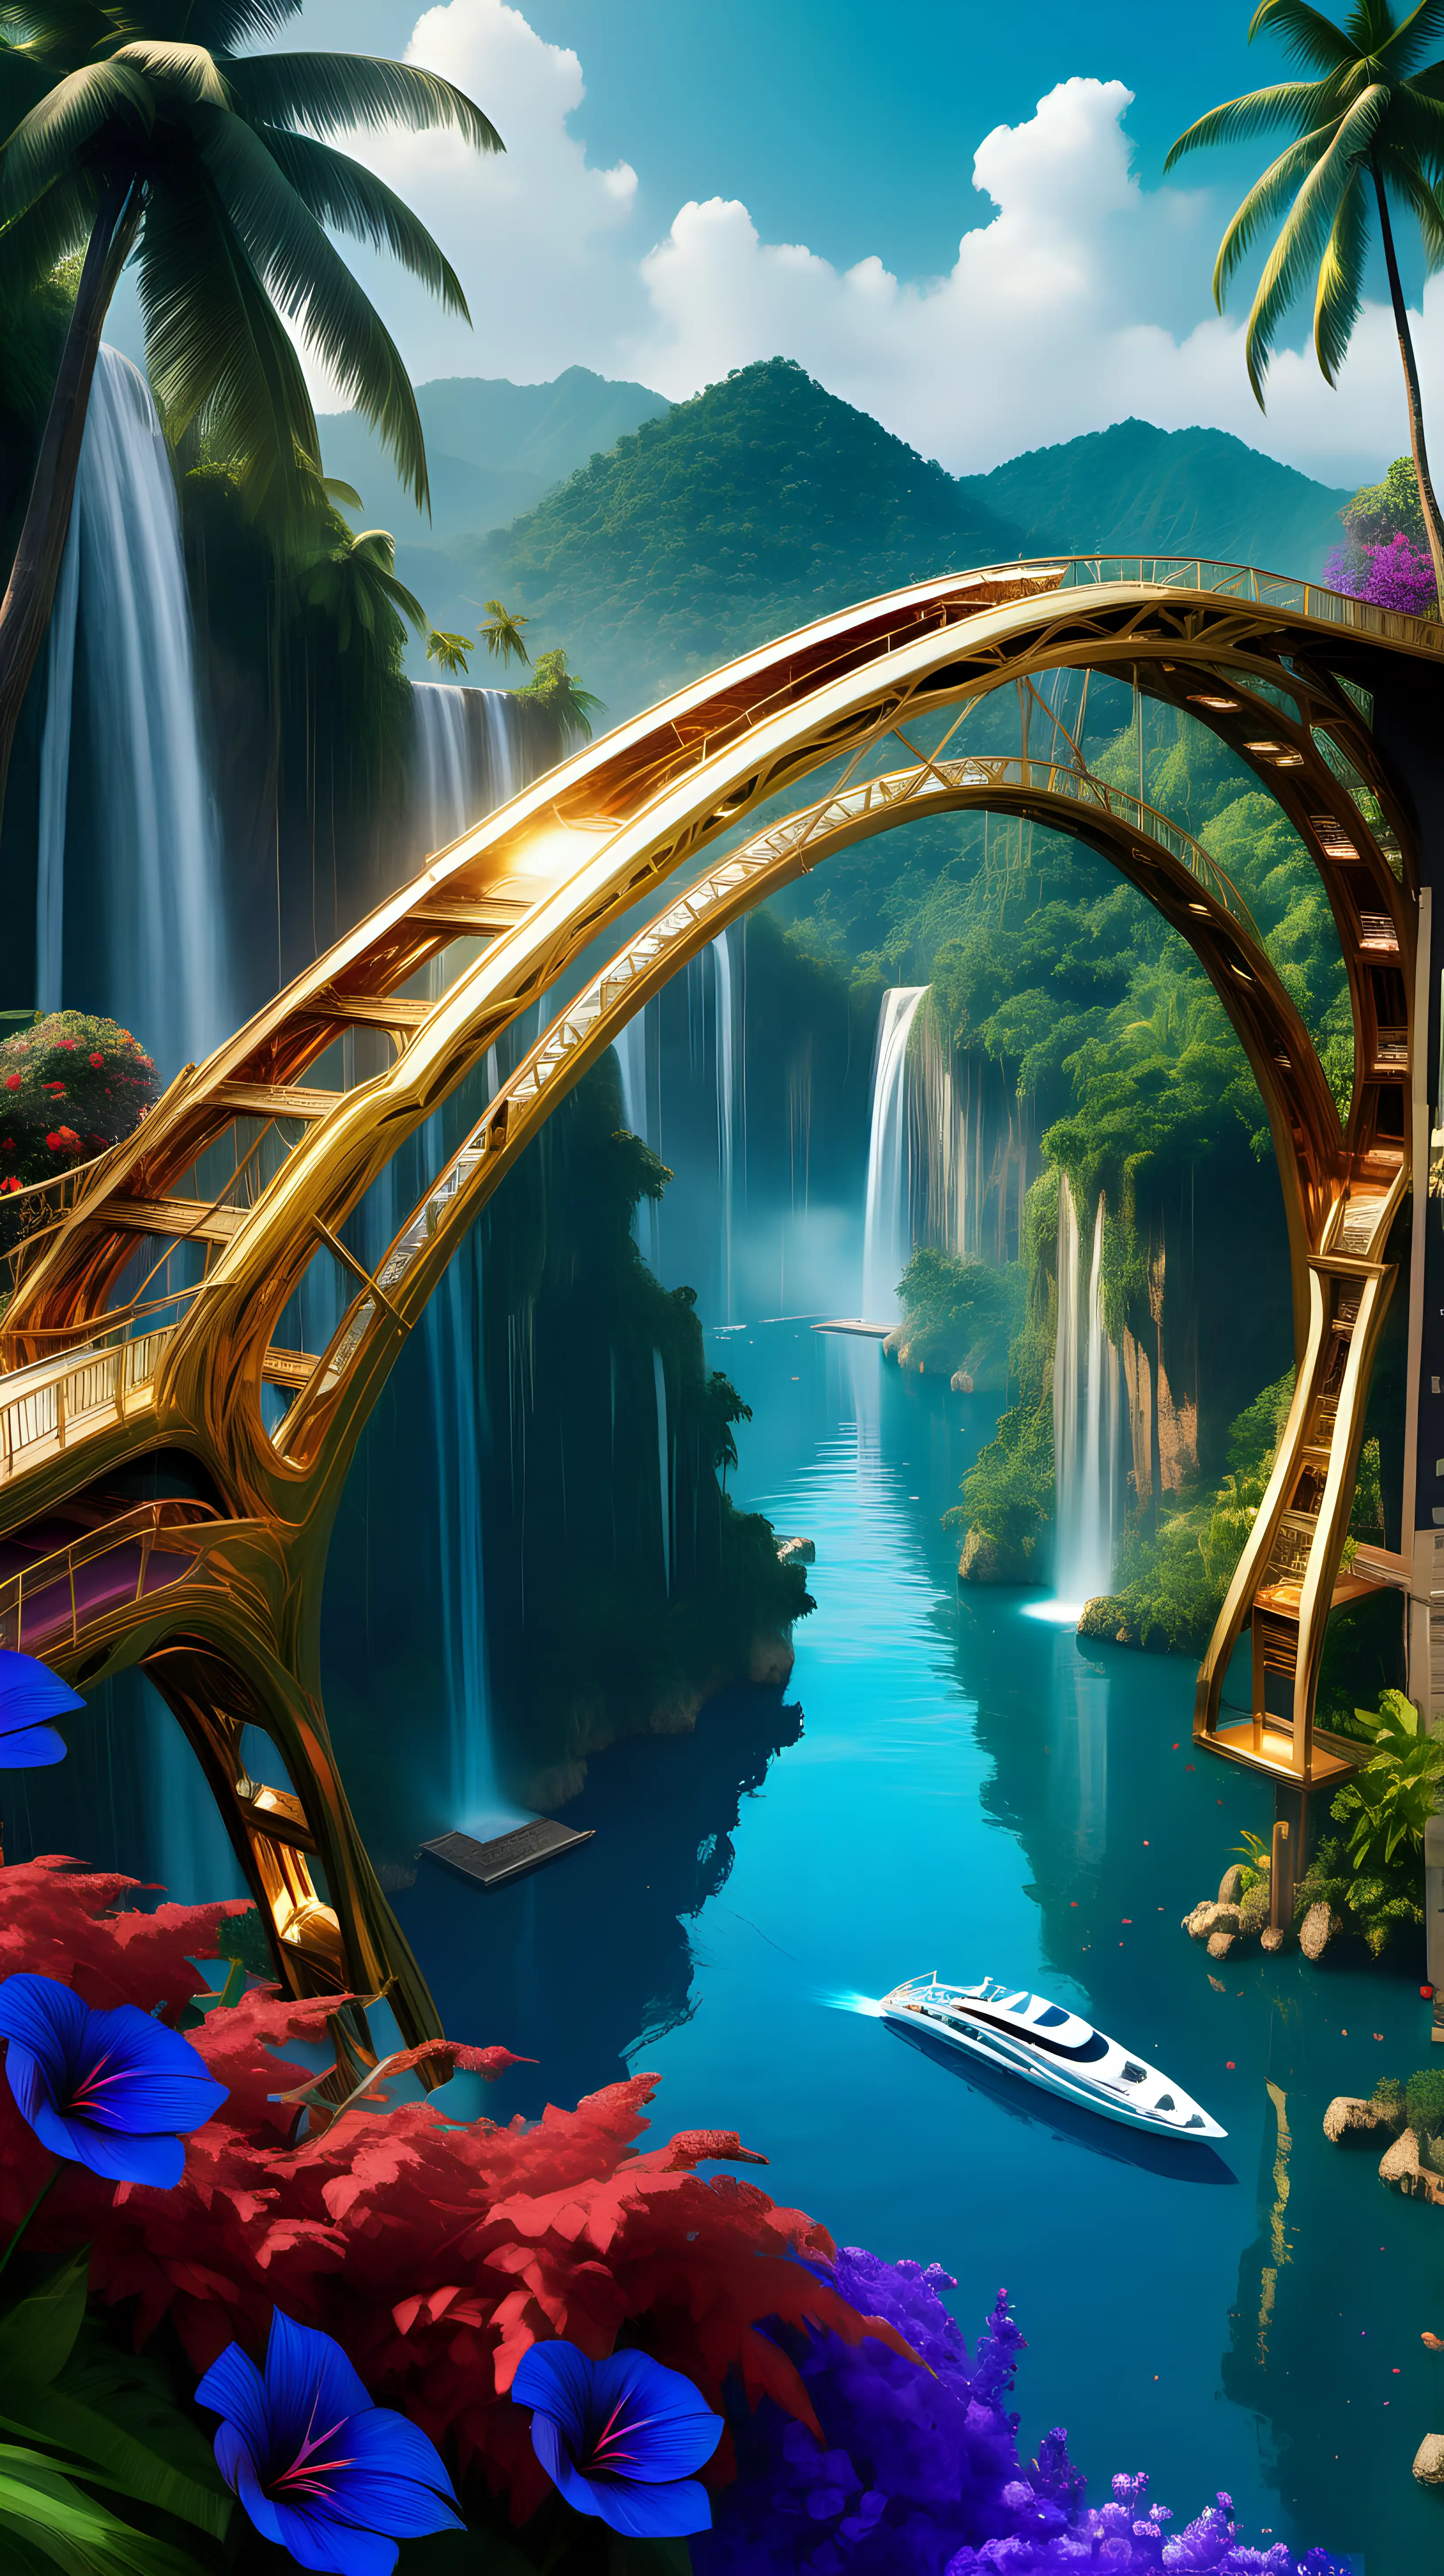 Futuristic Golden Bridge Over Cascading River with Vibrant Flora and Yacht